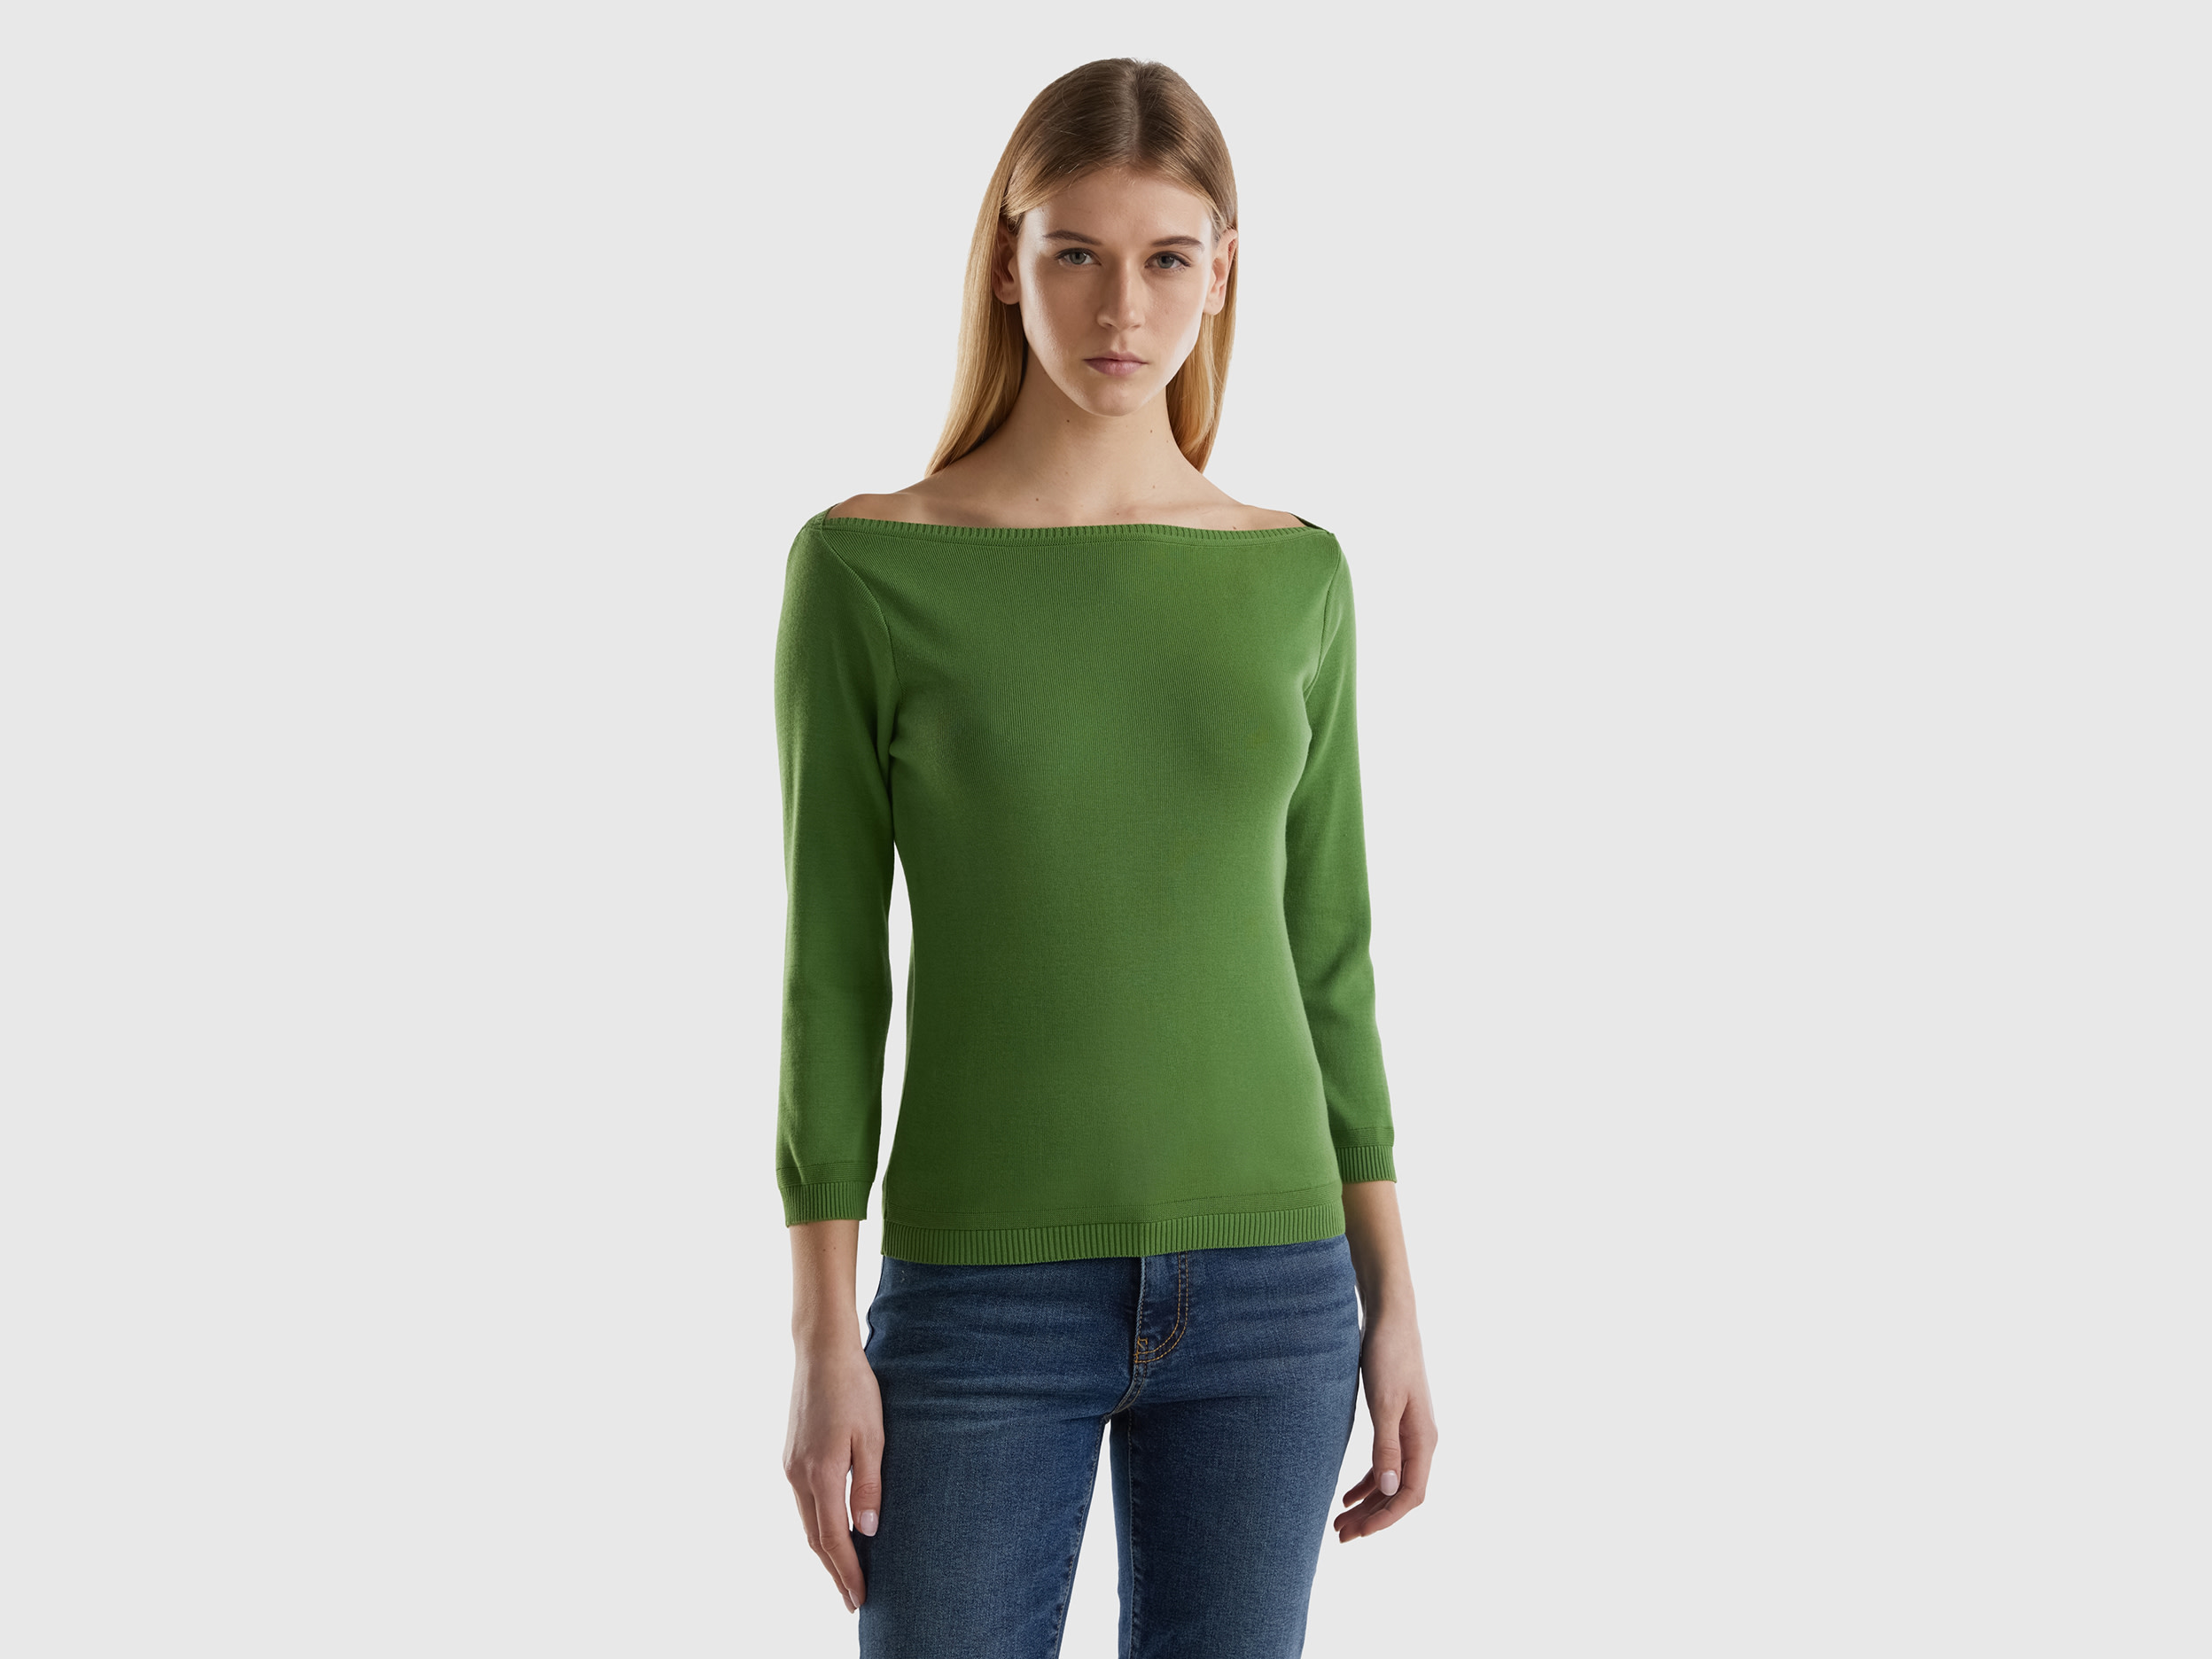 Benetton, 100% Cotton Boat Neck Sweater, size S, Military Green, Women